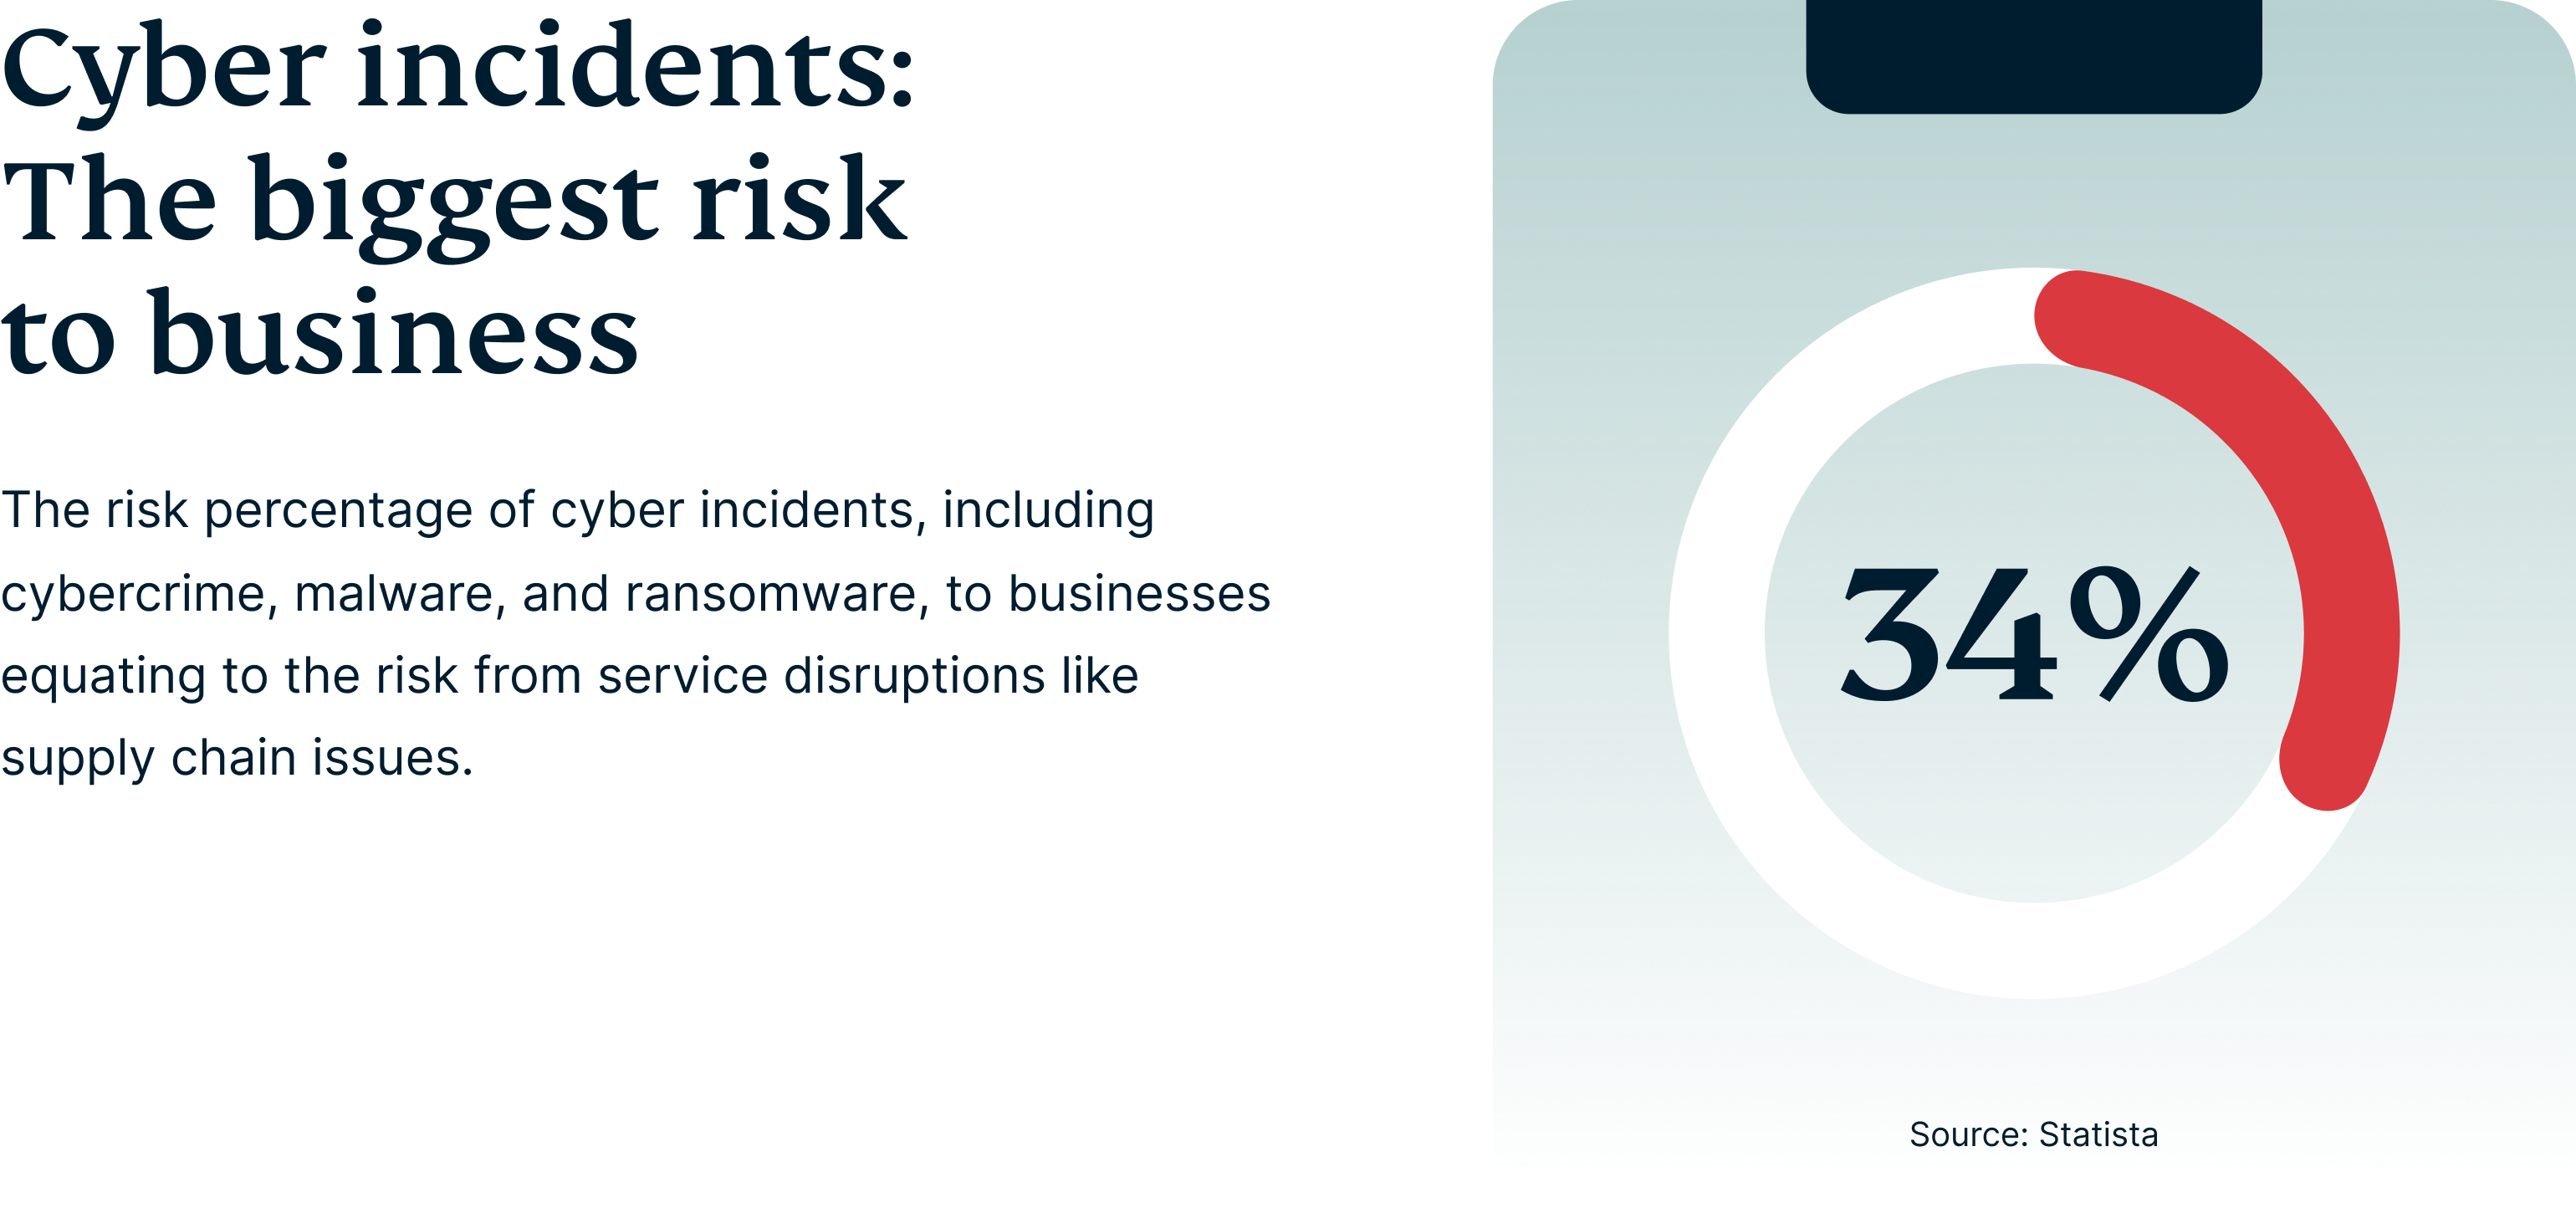 cyber-incidents-biggest-risk-to-business